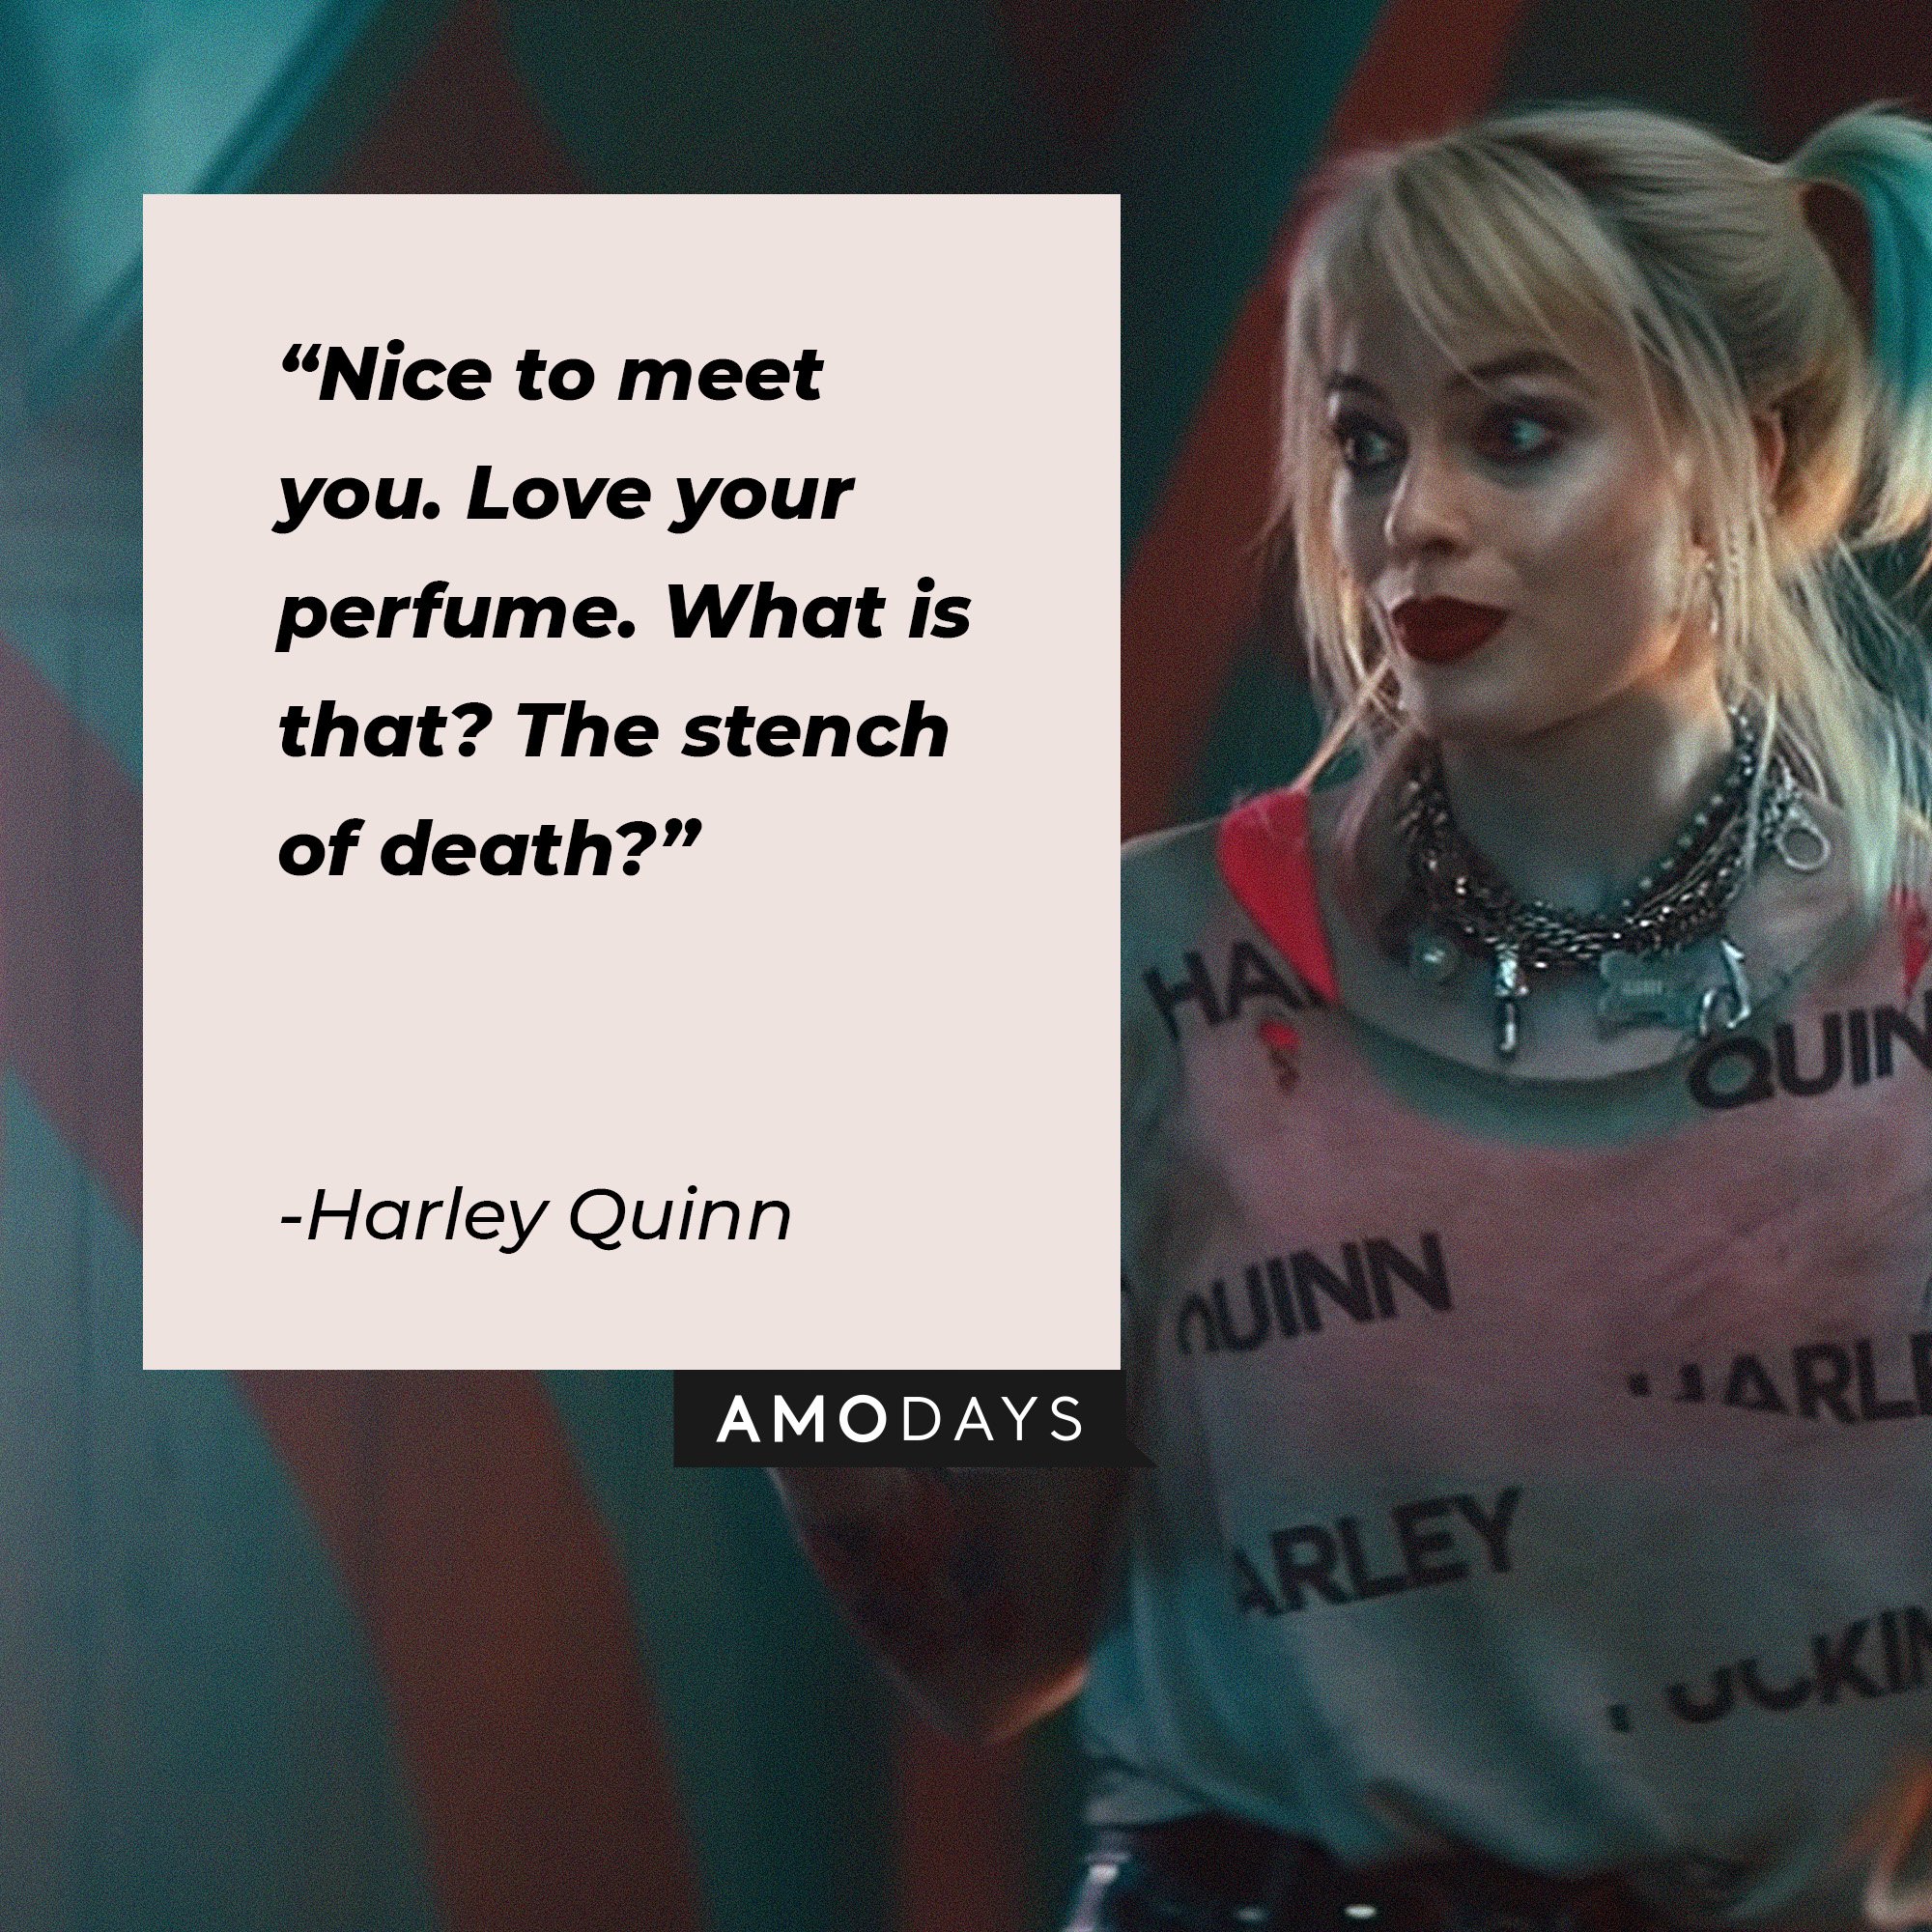 Harley Quinn’s quote: “Nice to meet you. Love your perfume. What is that? The stench of death?”  | Source: Image: AmoDays